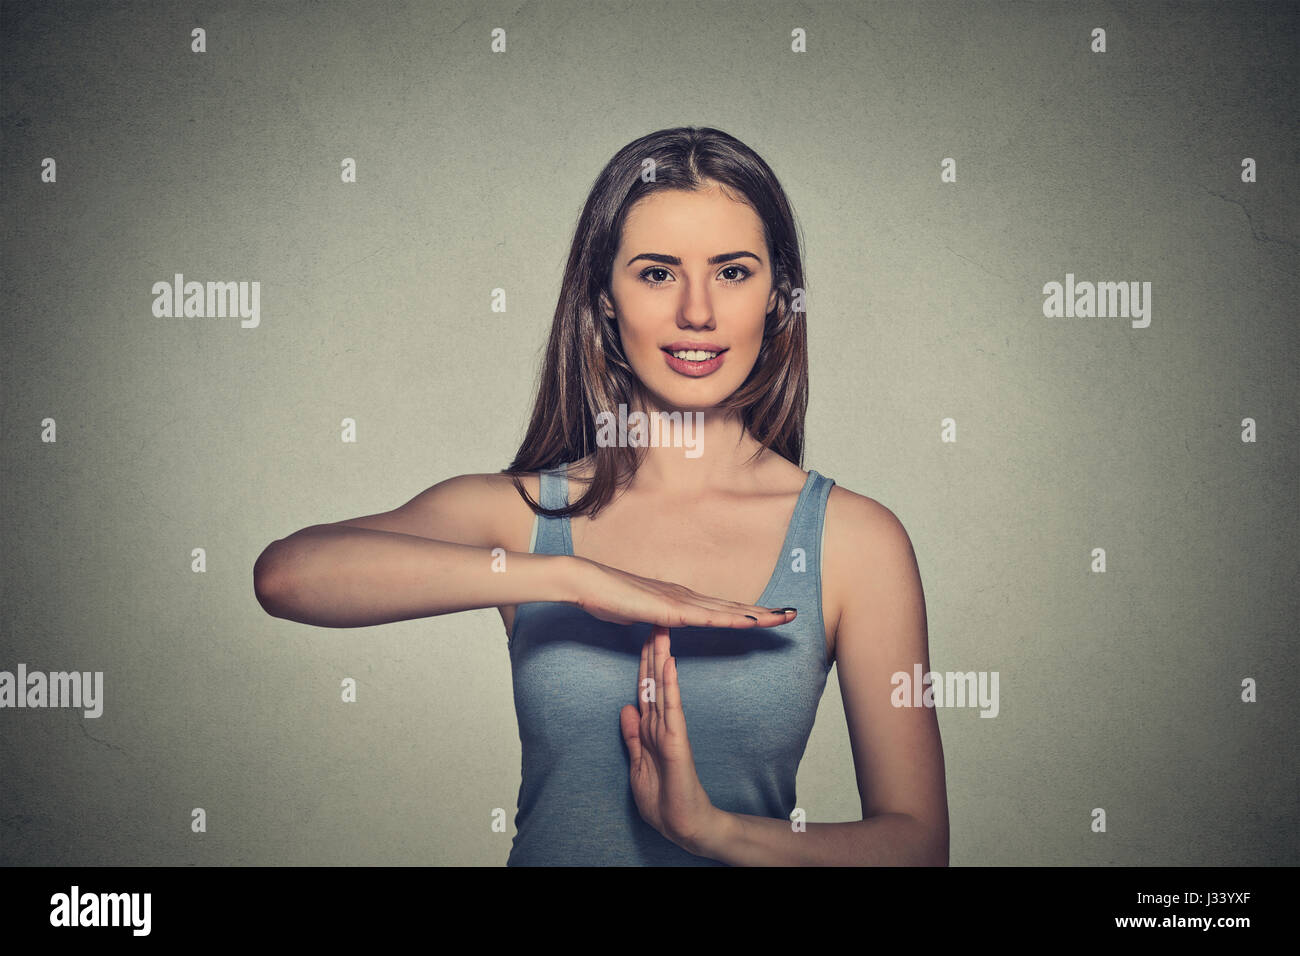 Closeup portrait, young, happy, smiling woman showing time out gesture with hands isolated on gray wall background. Positive human emotion facial expr Stock Photo